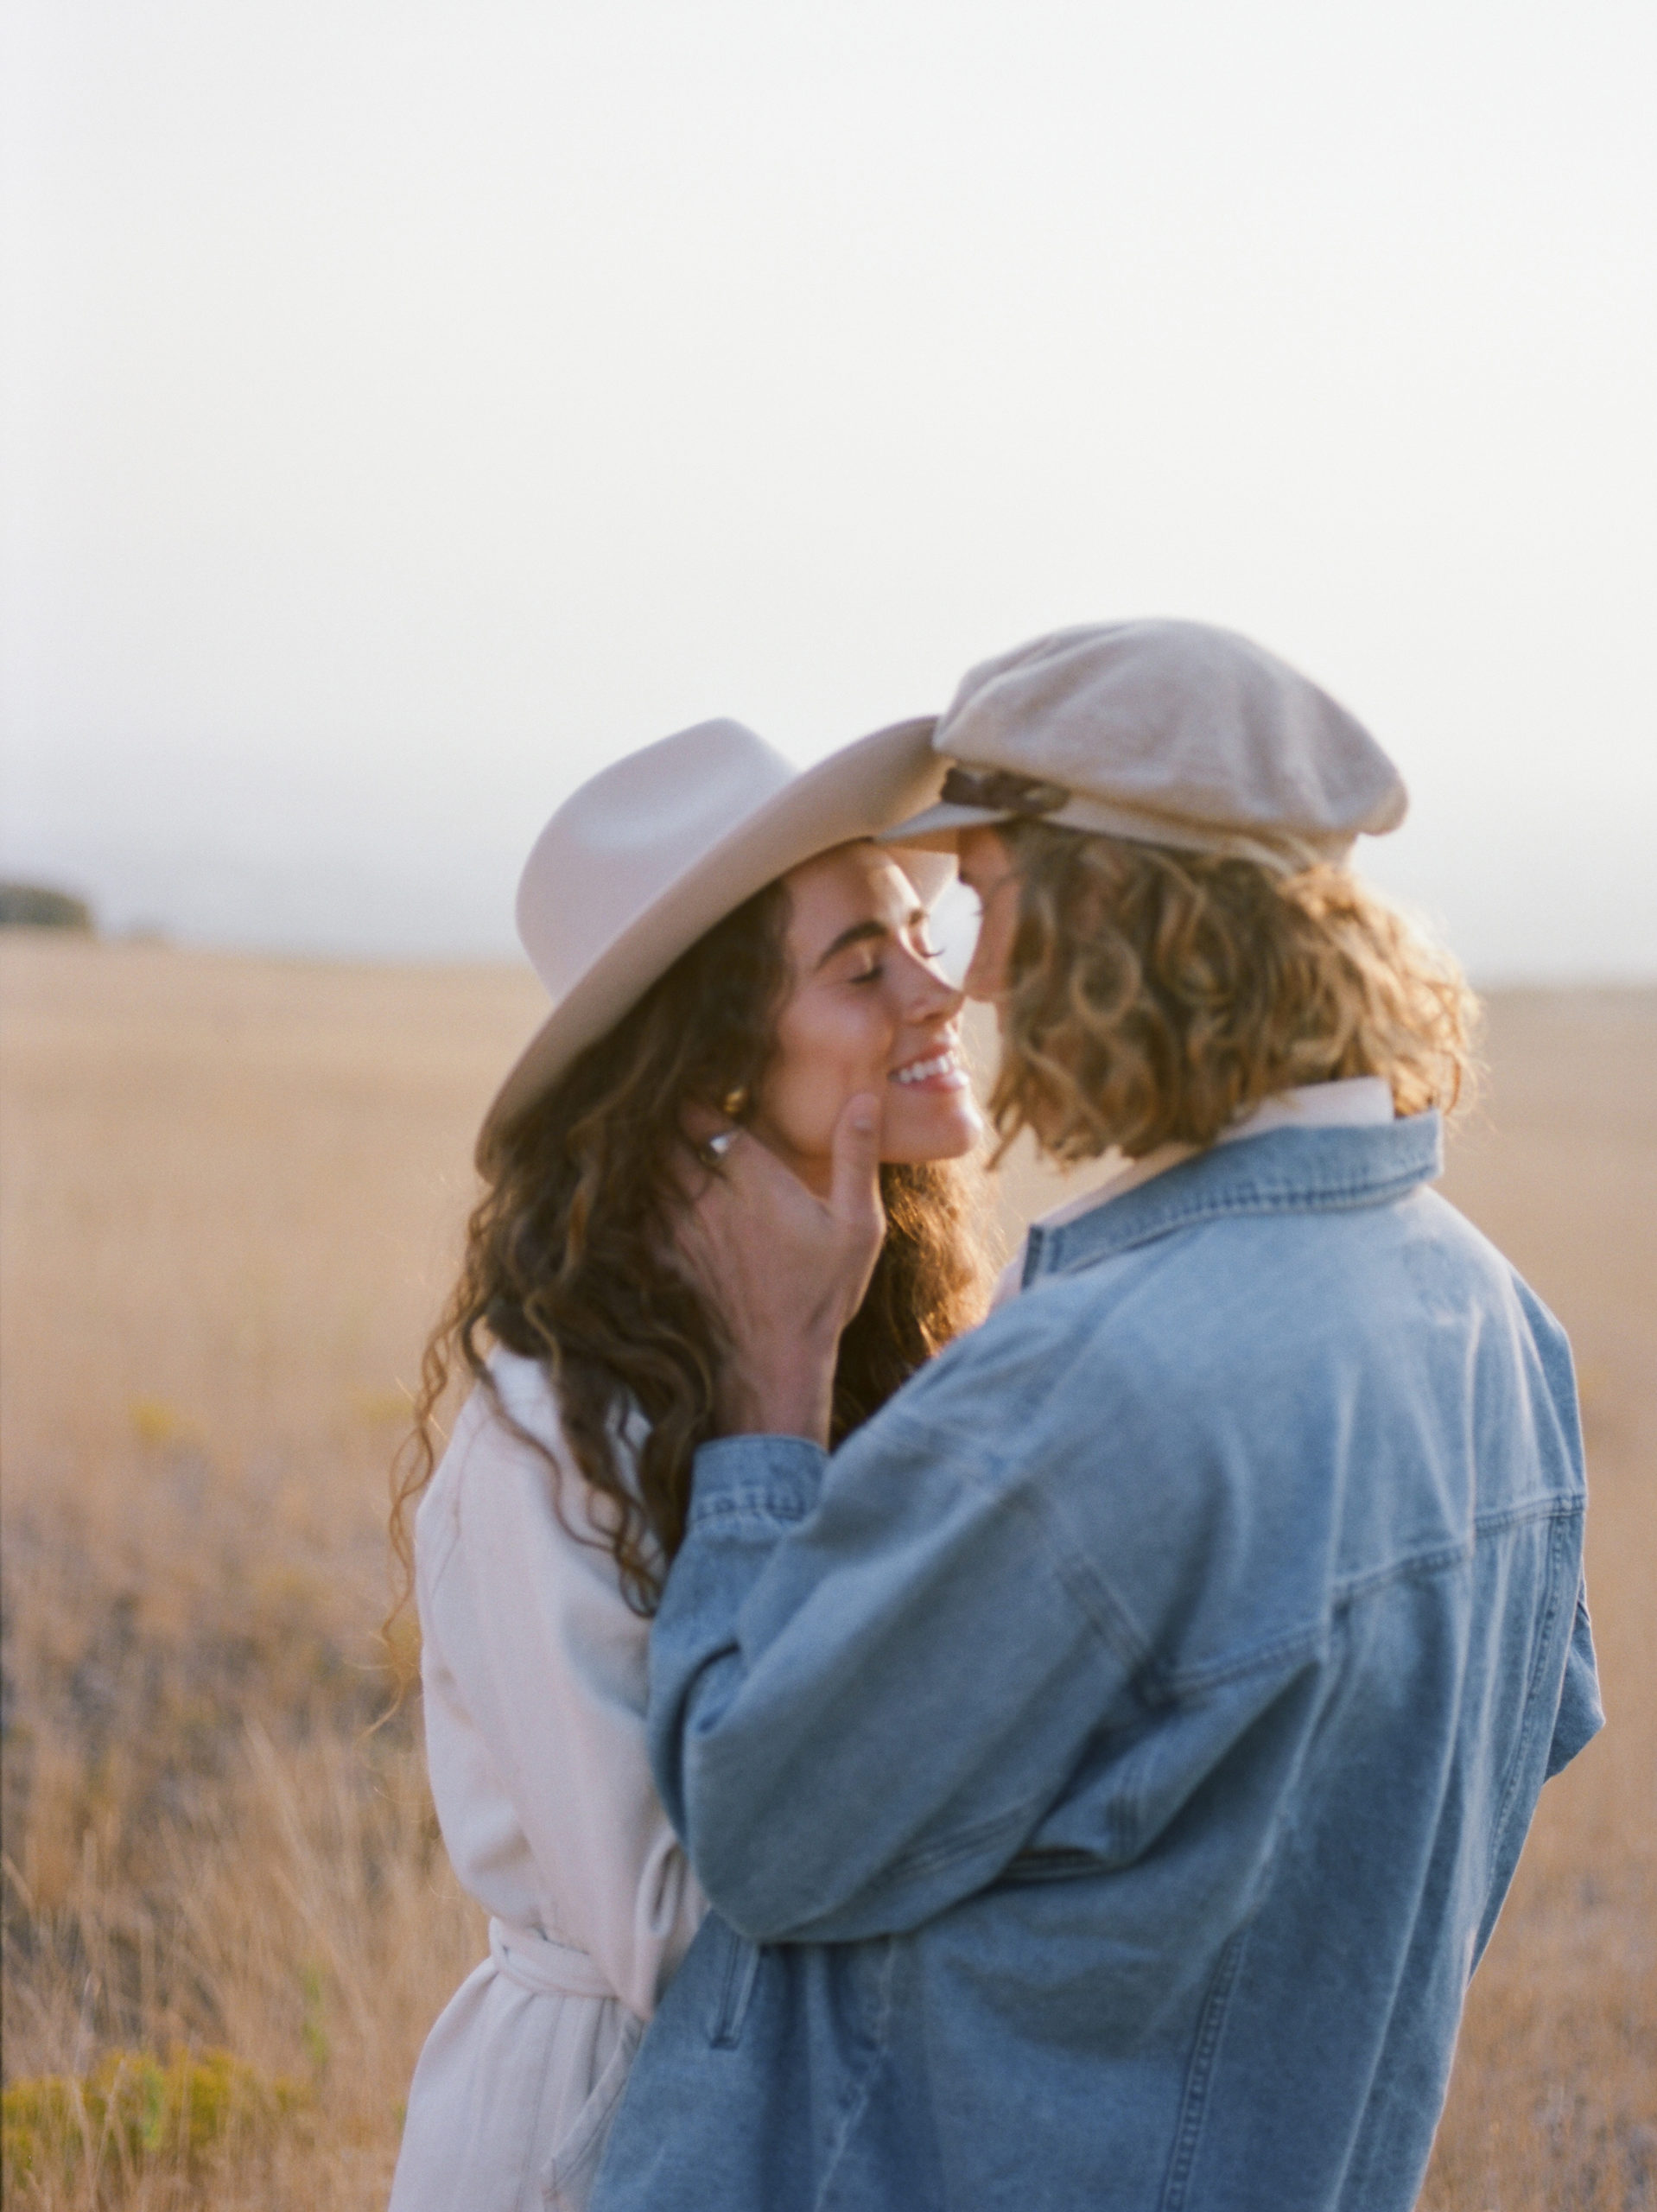 A female with brunette long hair and a male with short blonde hair couple posing for their engagement photos in their Utah location.